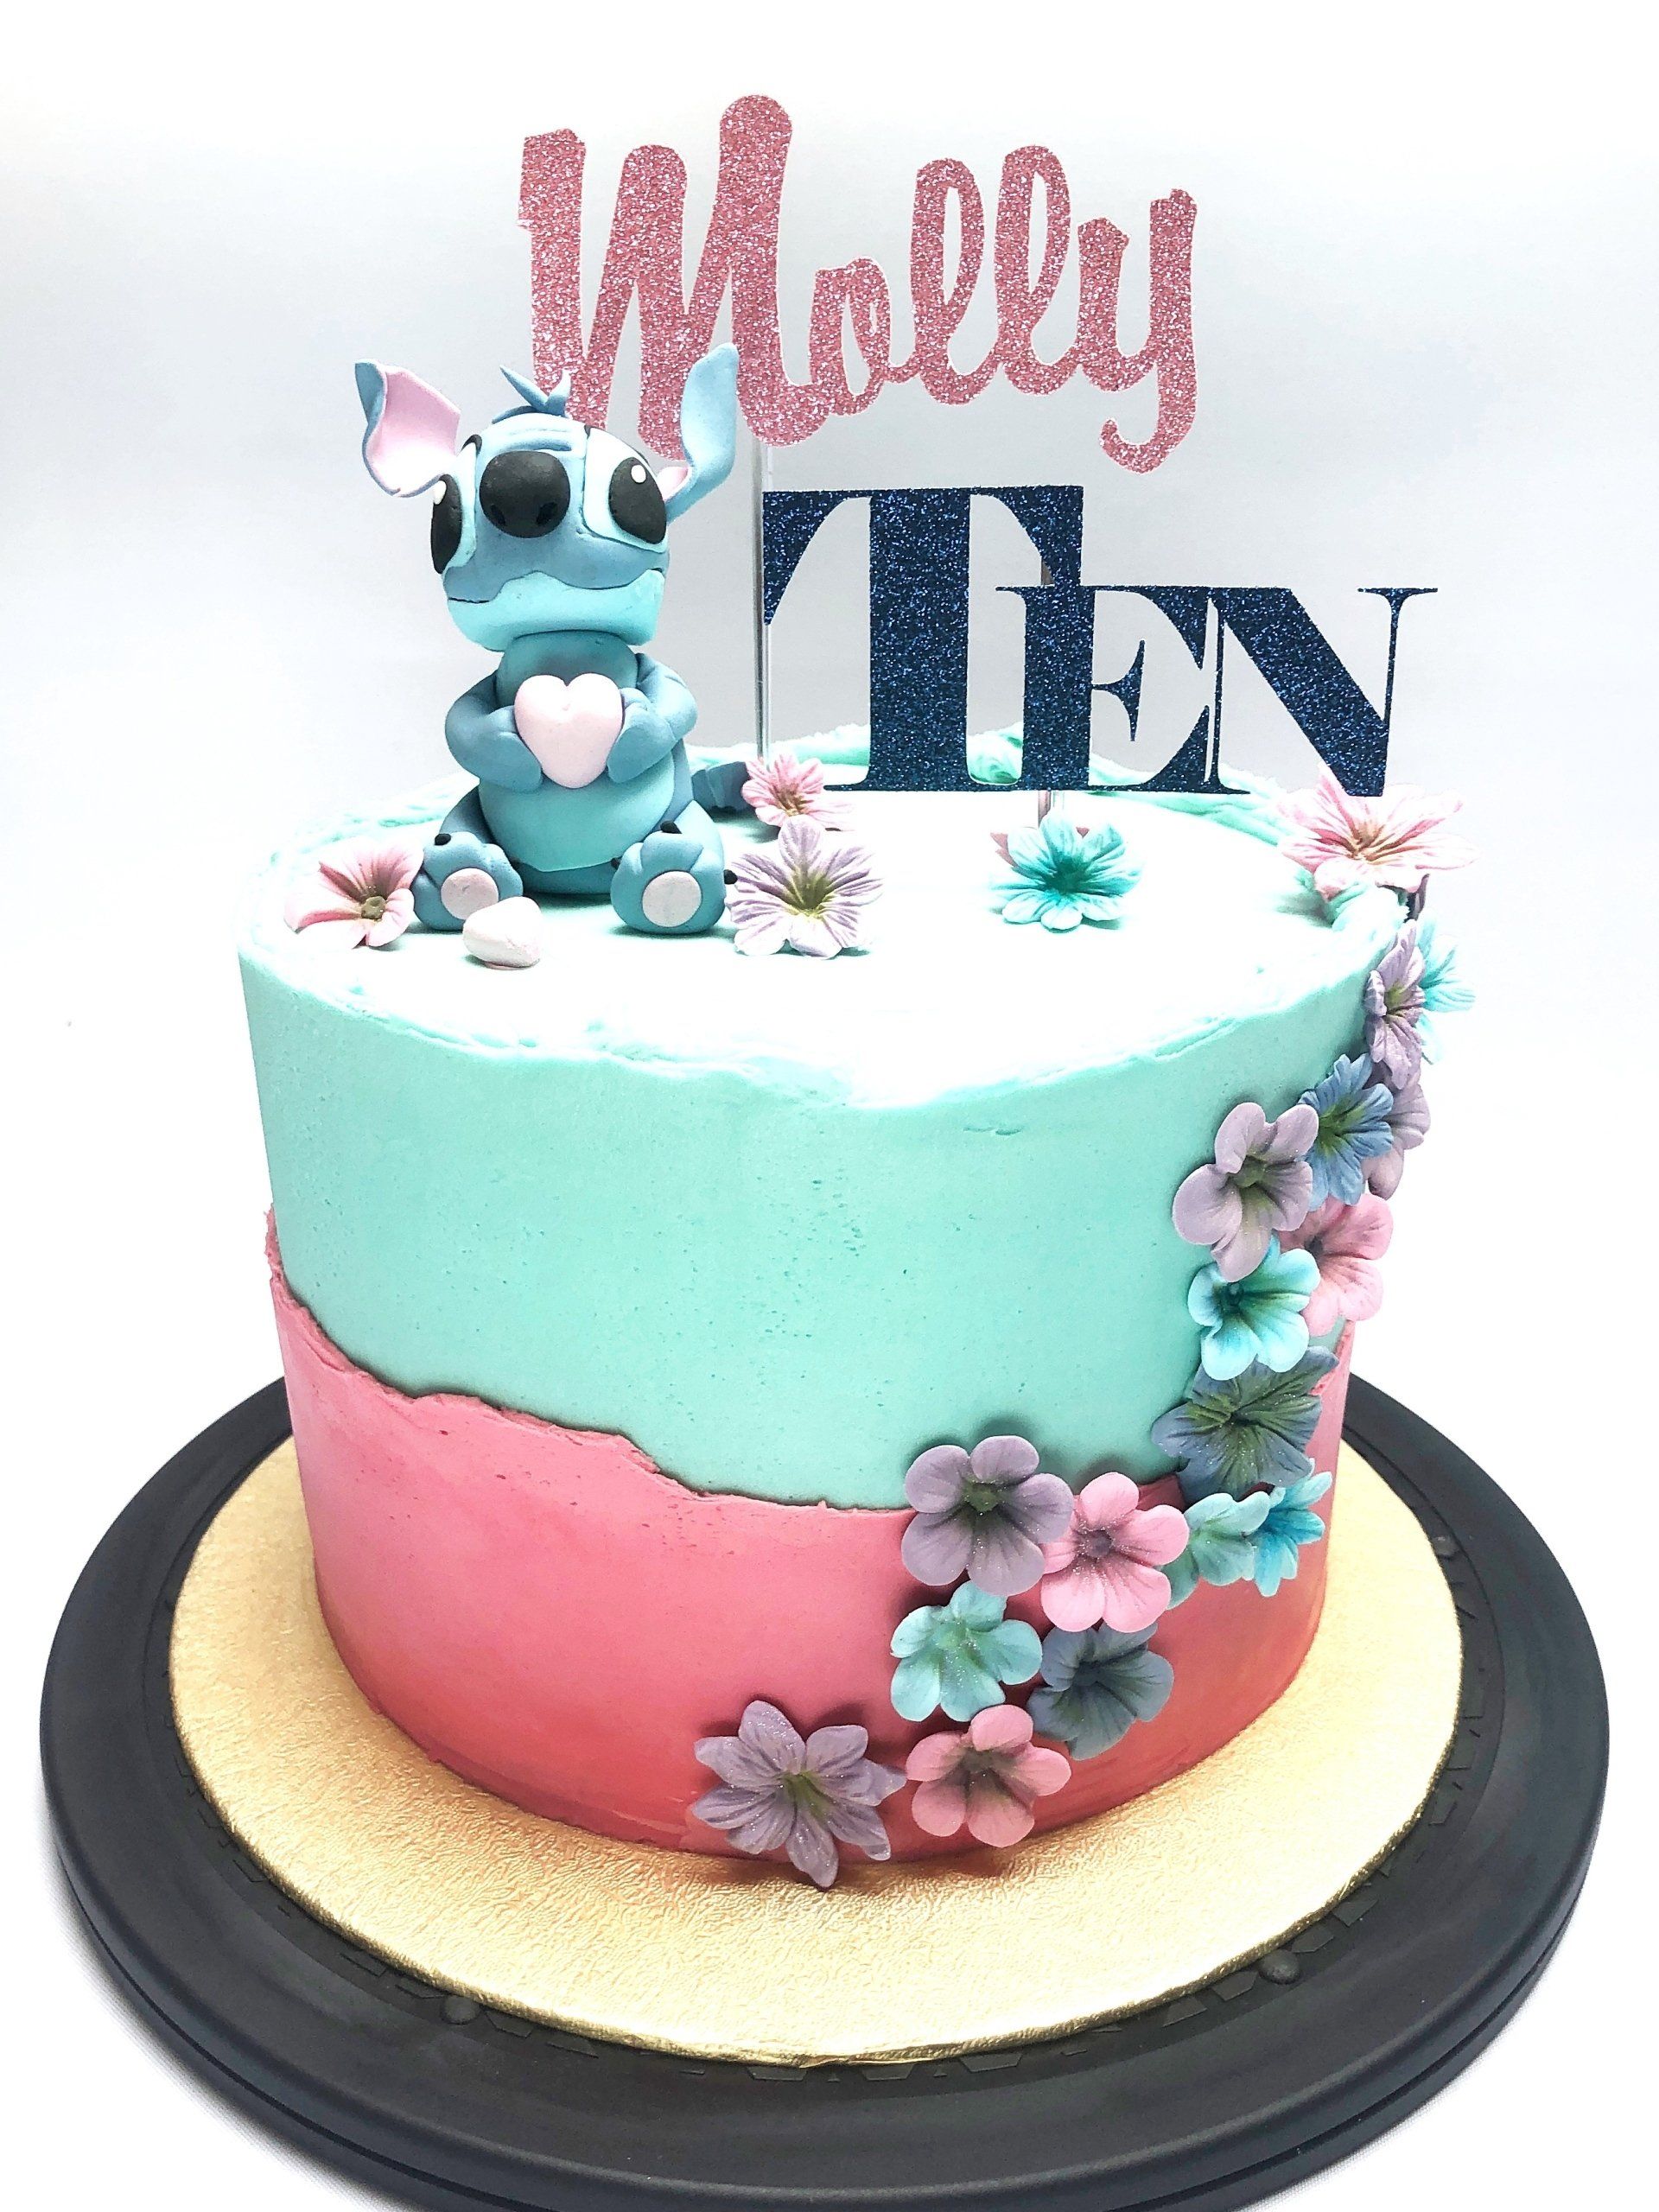 Adorable Stitch themed cake with fondant Stitch character, and fondant flowers. The cake has pink and blue buttercream icing and a topper in pink and blue saying 